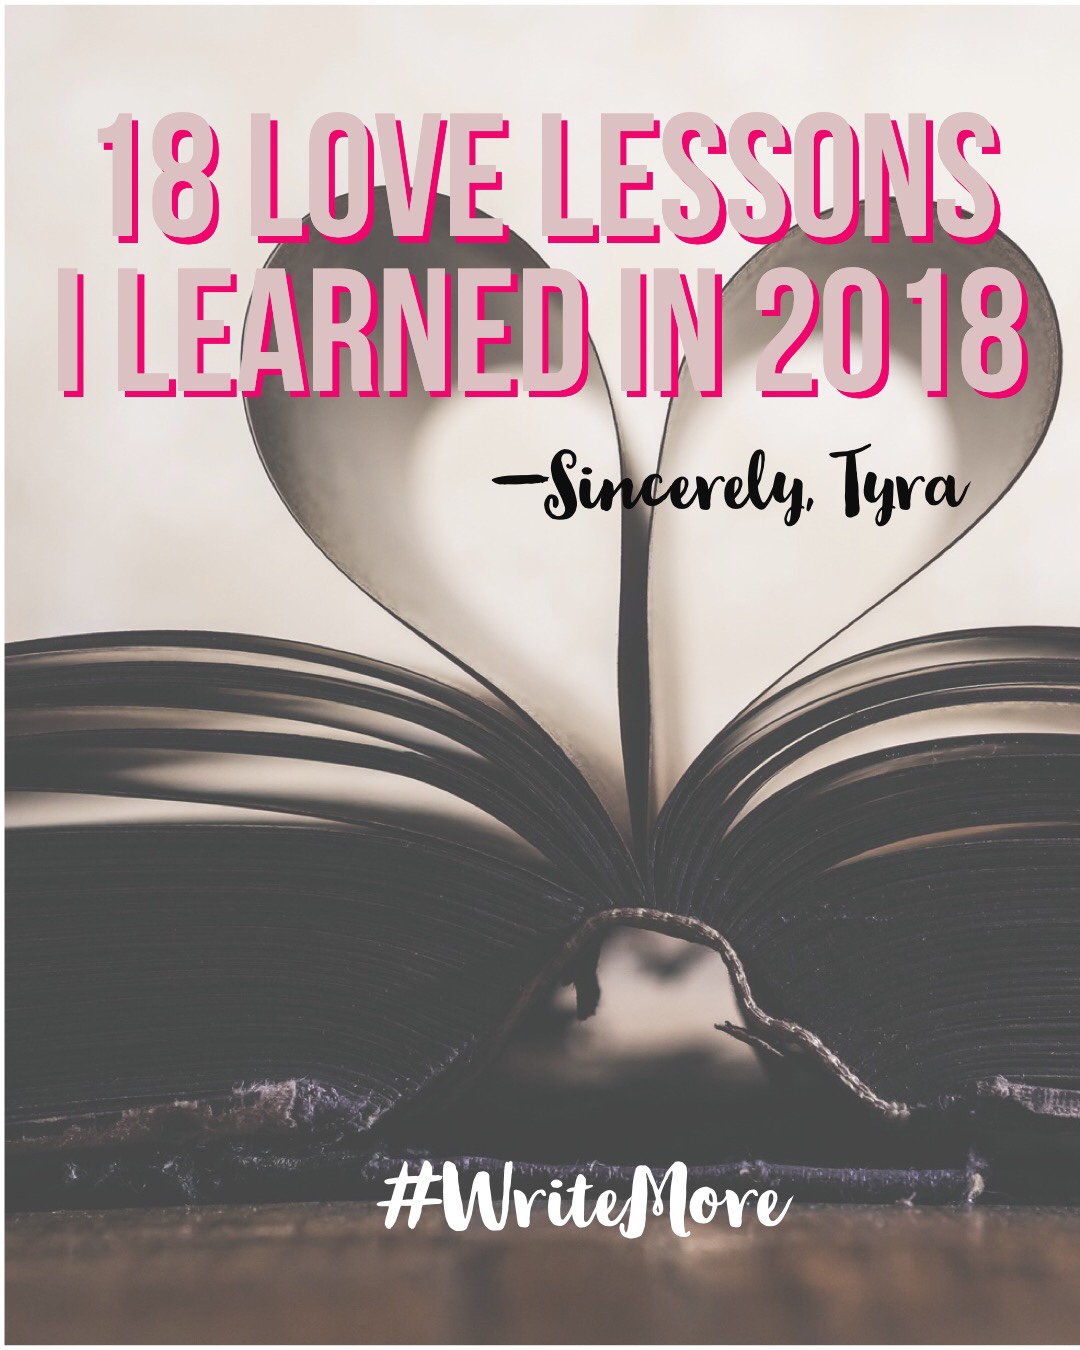 18 Love Lessons I Learned in 2018